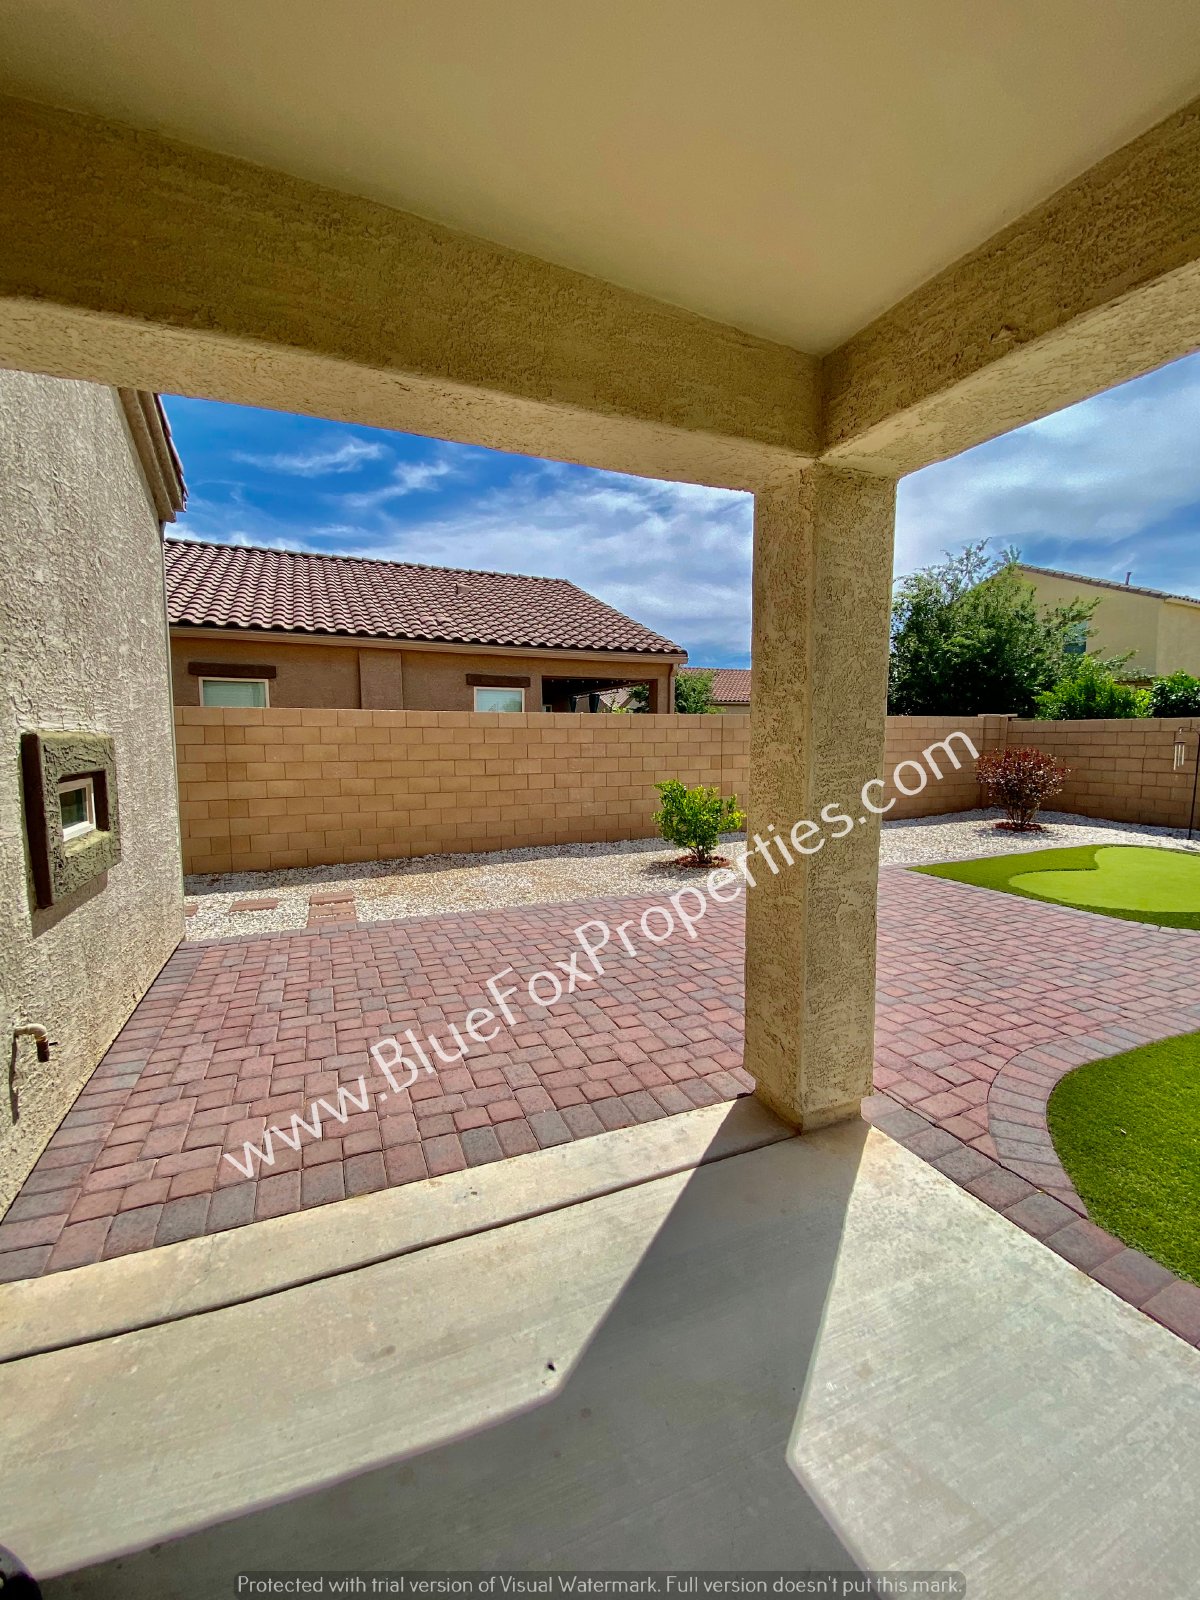 9009 W Rolling Springs Dr property image